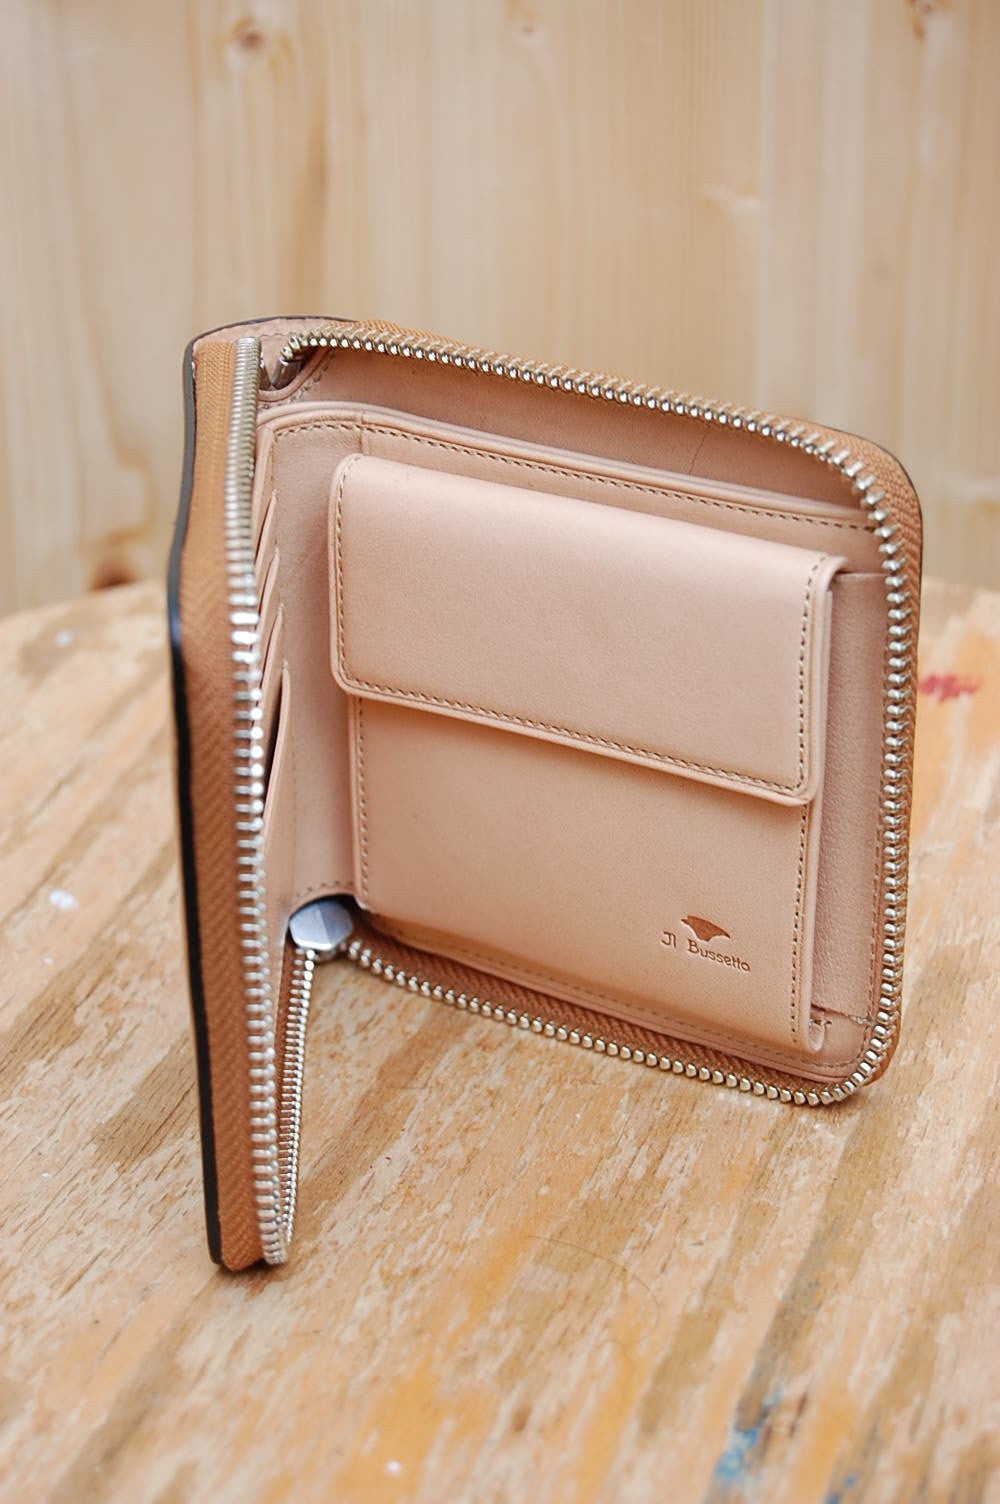 Il Bussetto Zipped Wallet Camel